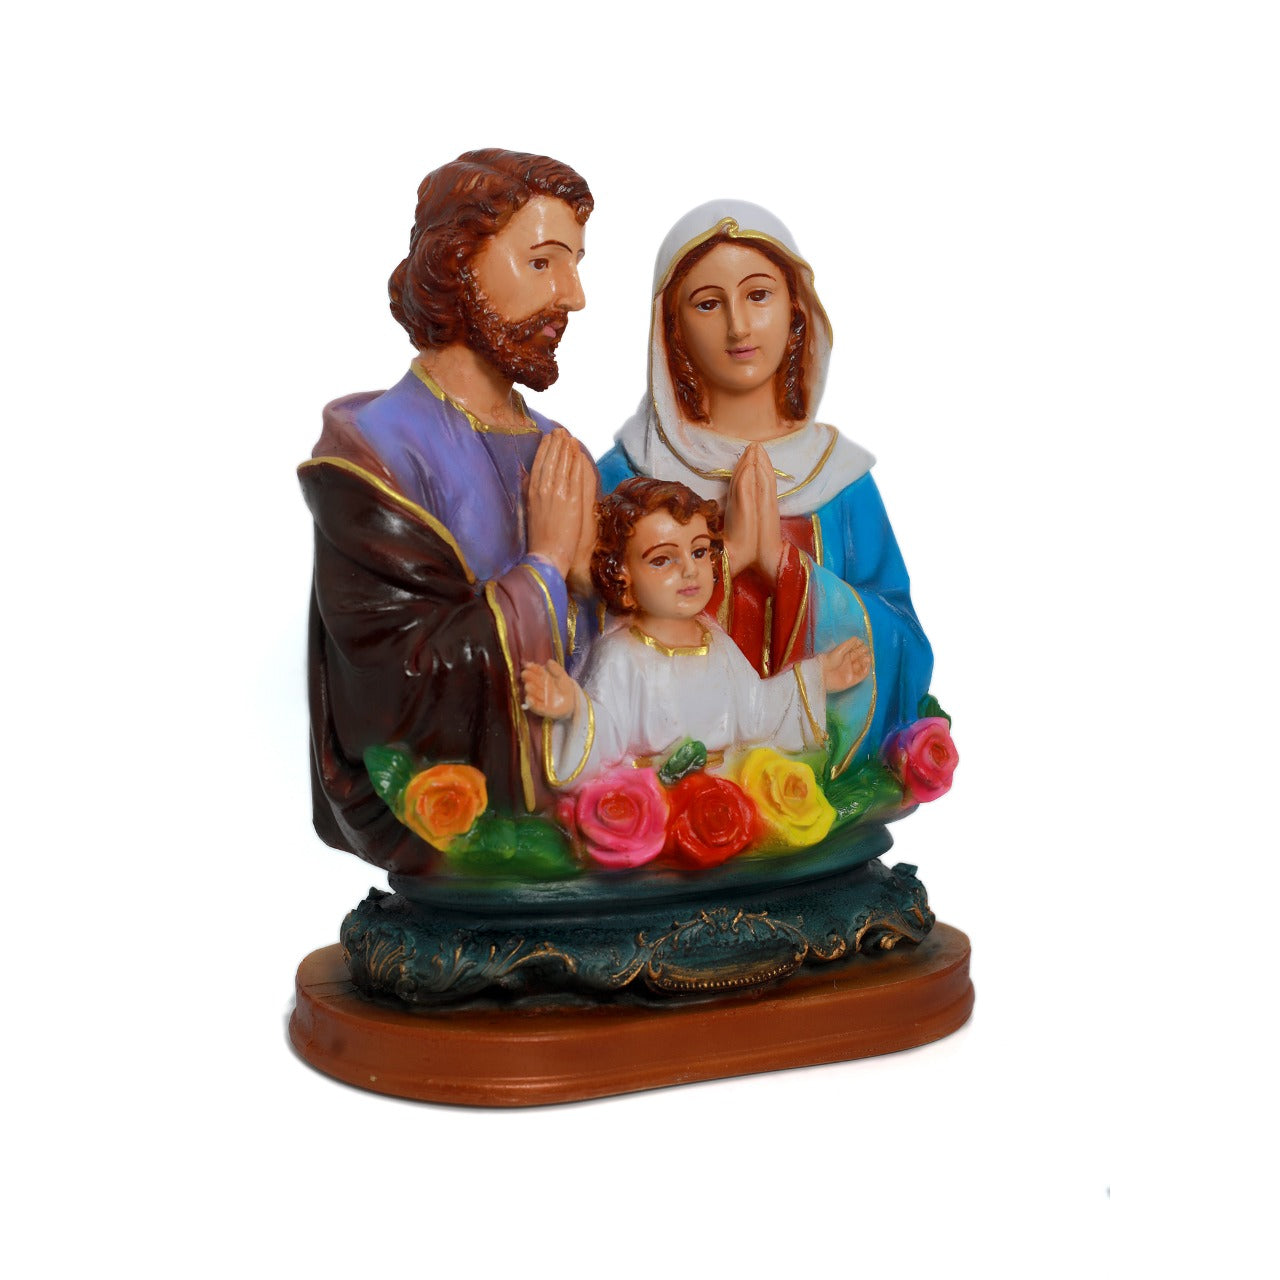 Holy Family 11 Inch Statue - Mary, Joseph, and Baby Jesus